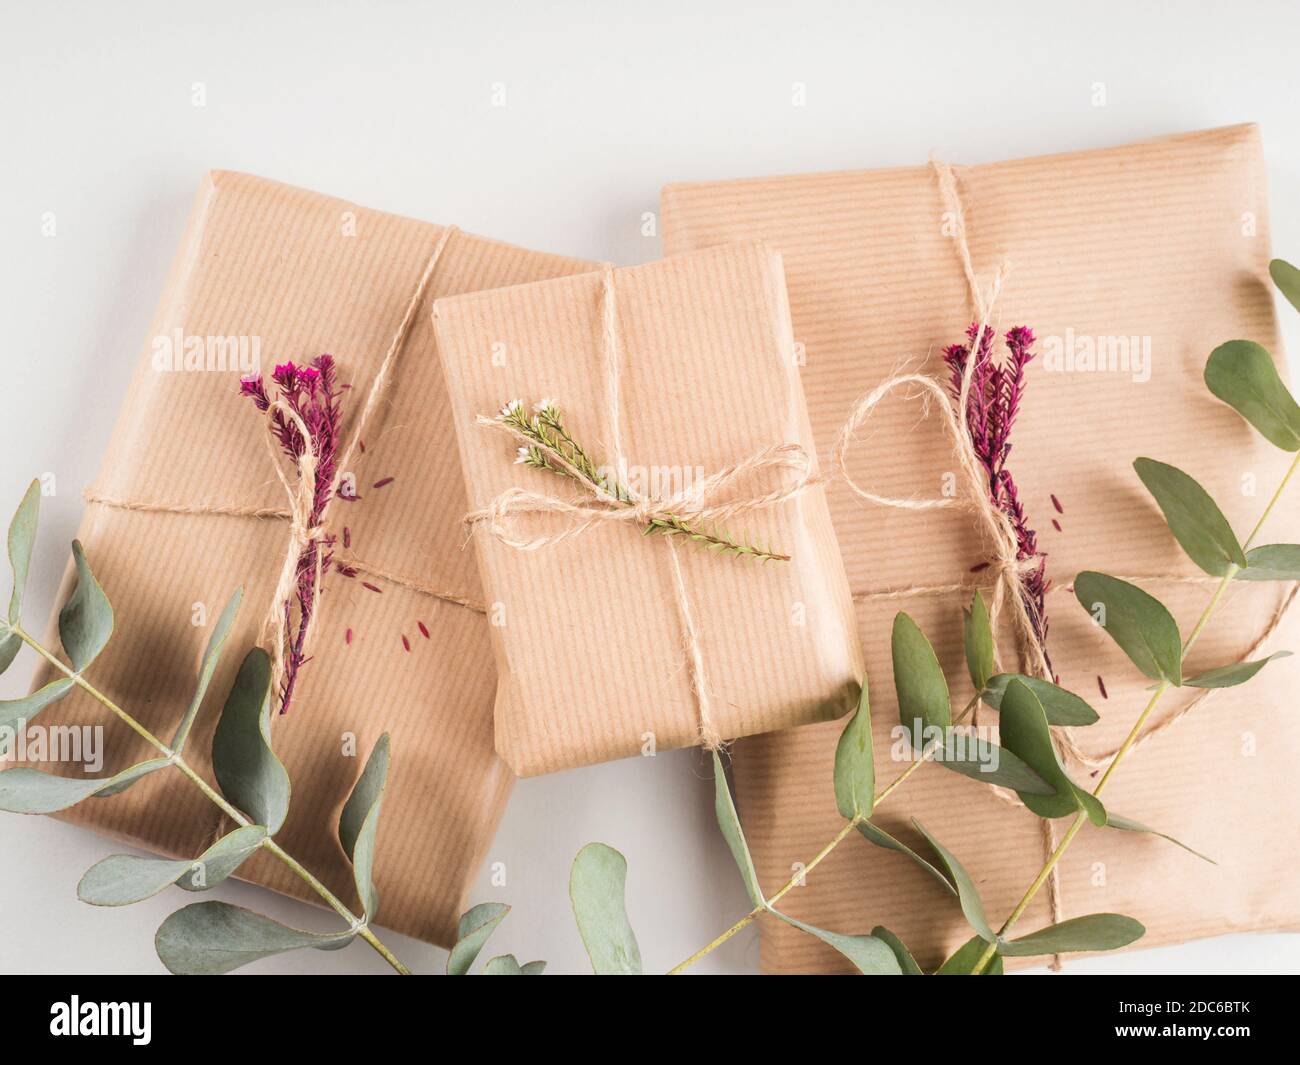 Gift boxes wrapped in craft paper with dried flowers Stock Photo - Alamy